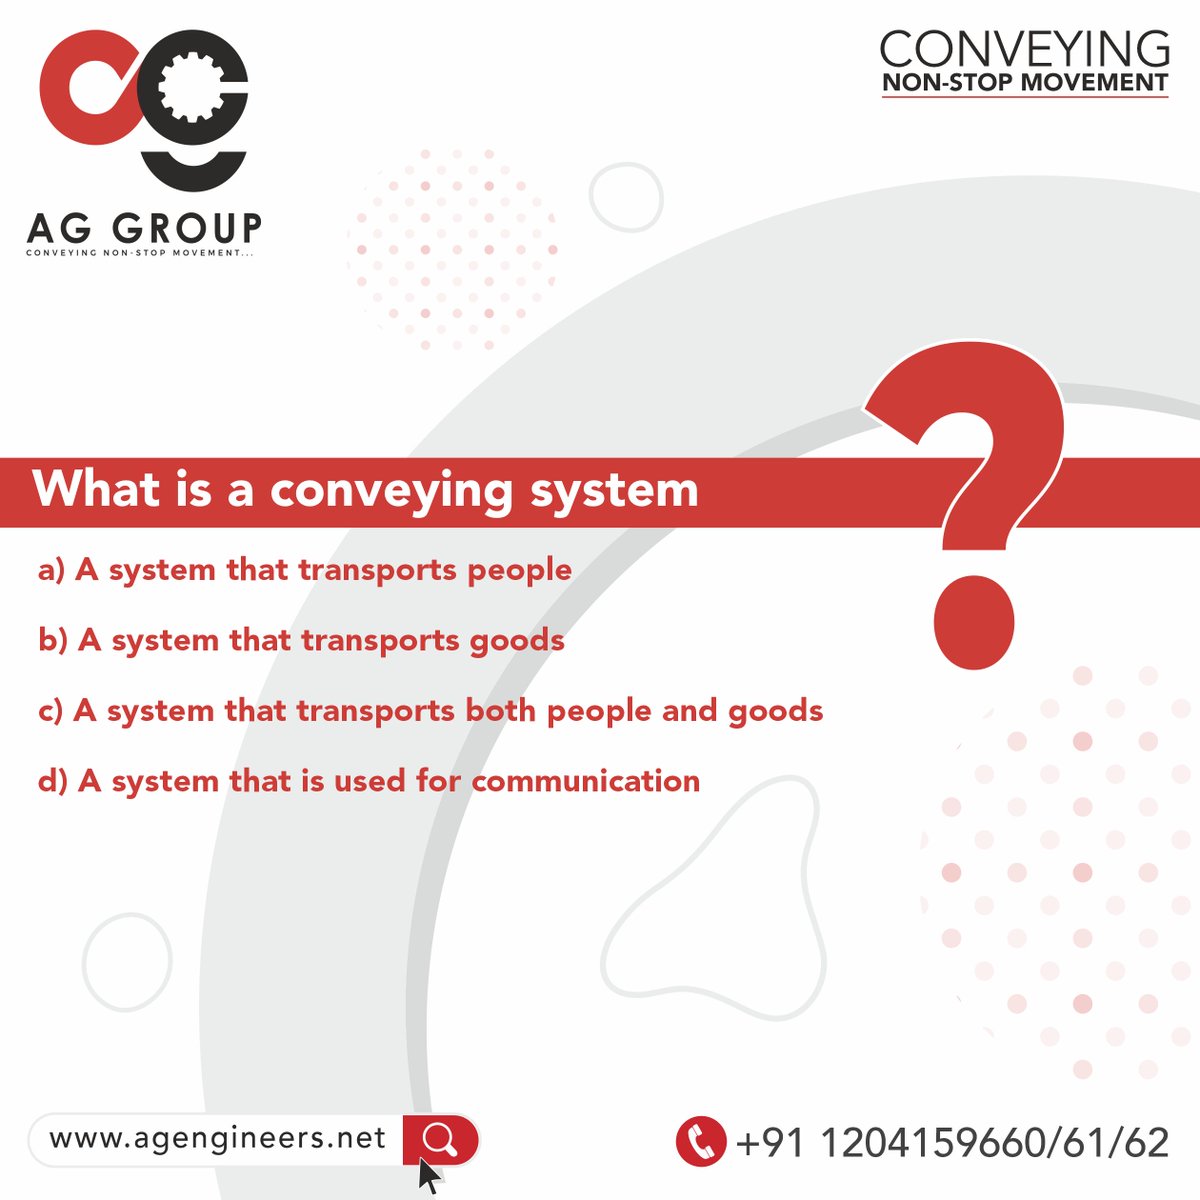 Test your knowledge! 
Write your answer in the comments below!

#aggroup #agengineers #MCQ #mcqchallenge #MCQsTest #DidYouKnow #answers  #conveyor #conveyorbelts #modularbelts #conveyorsystems #conveyorsolution #manufacturingindustry #startupbusiness